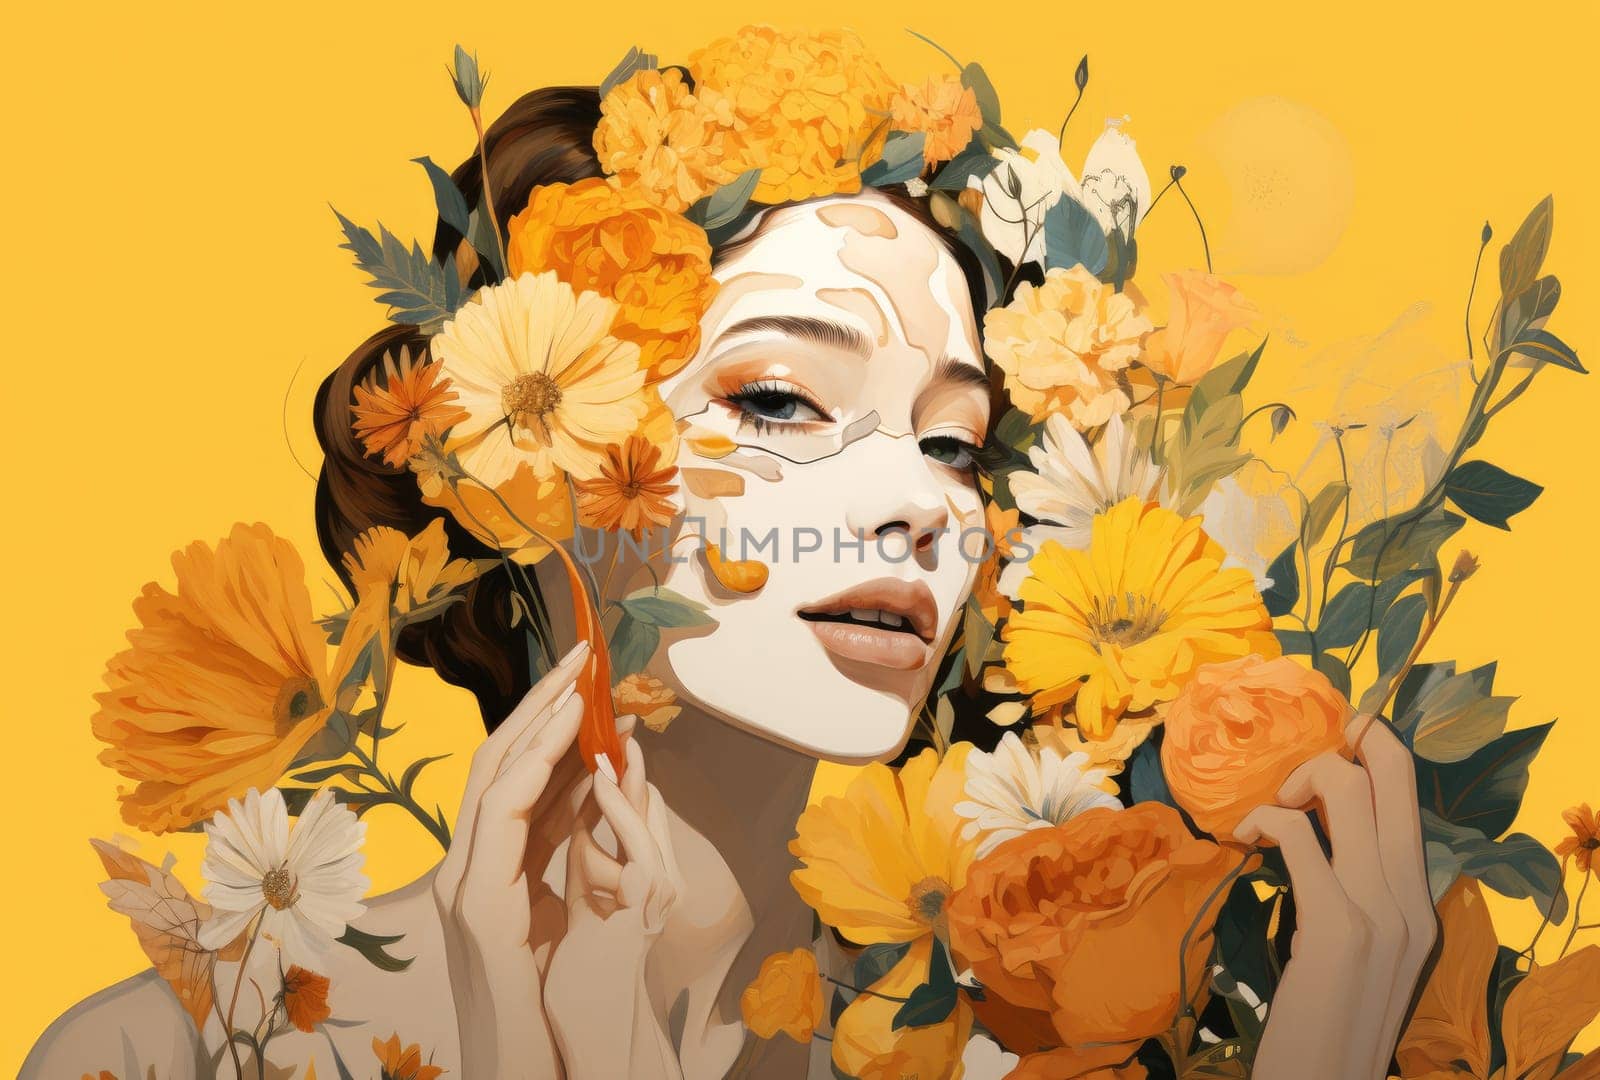 Abstract art portrait of young woman with flowers decoration comeliness